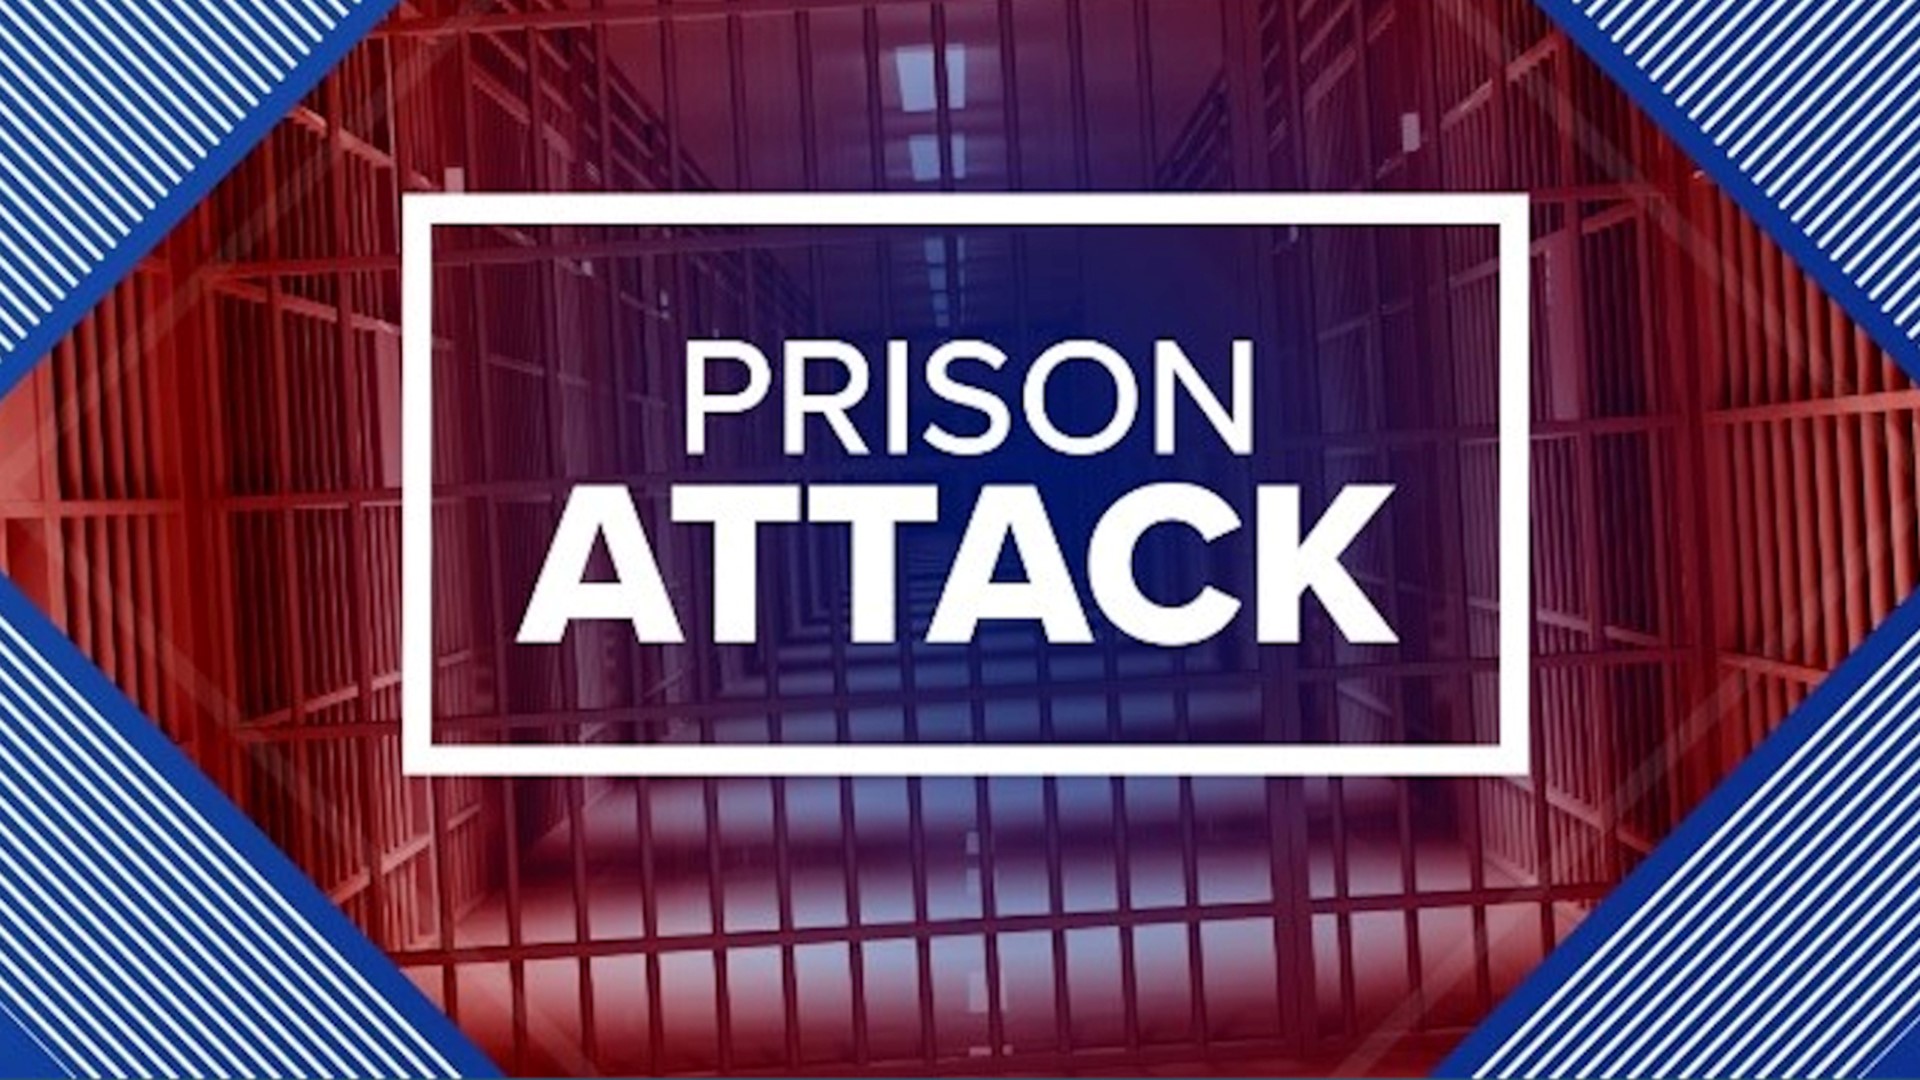 An inmate at the United States Penitentiary in Allenwood is accused of attacking two guards Monday morning.